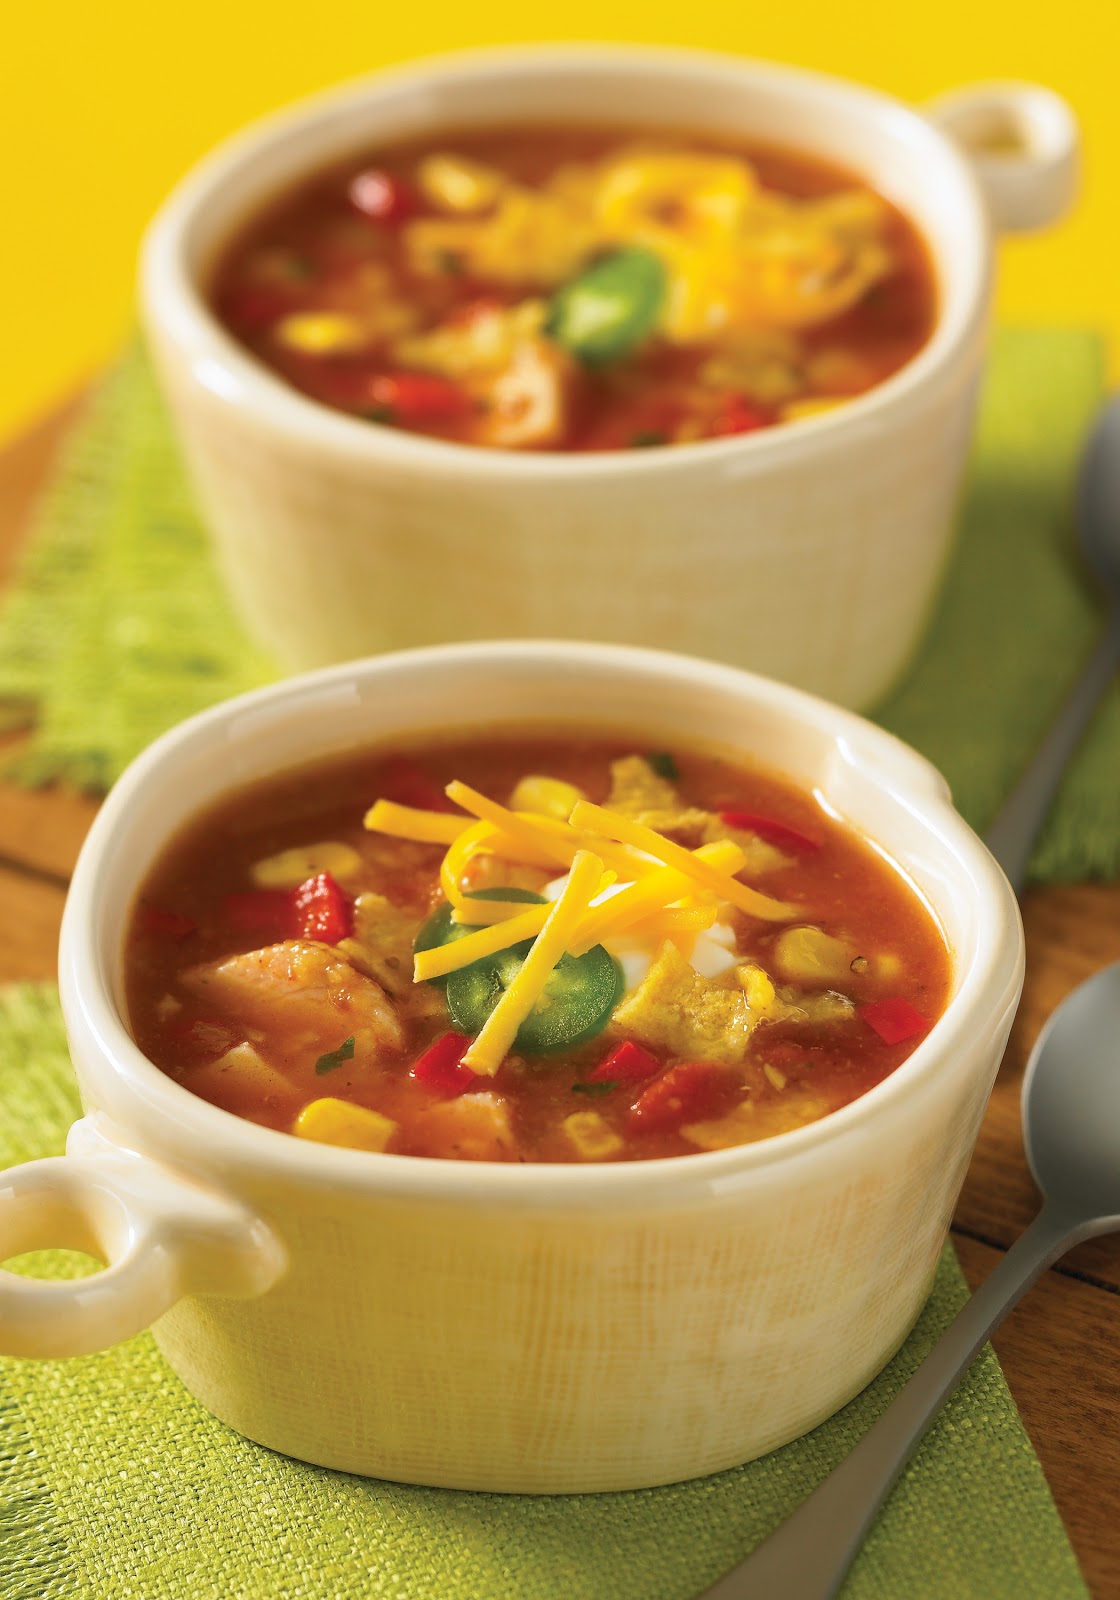 Addicted to Recipes: Tuesday Tortilla Soup - Slow Cooker Thursday